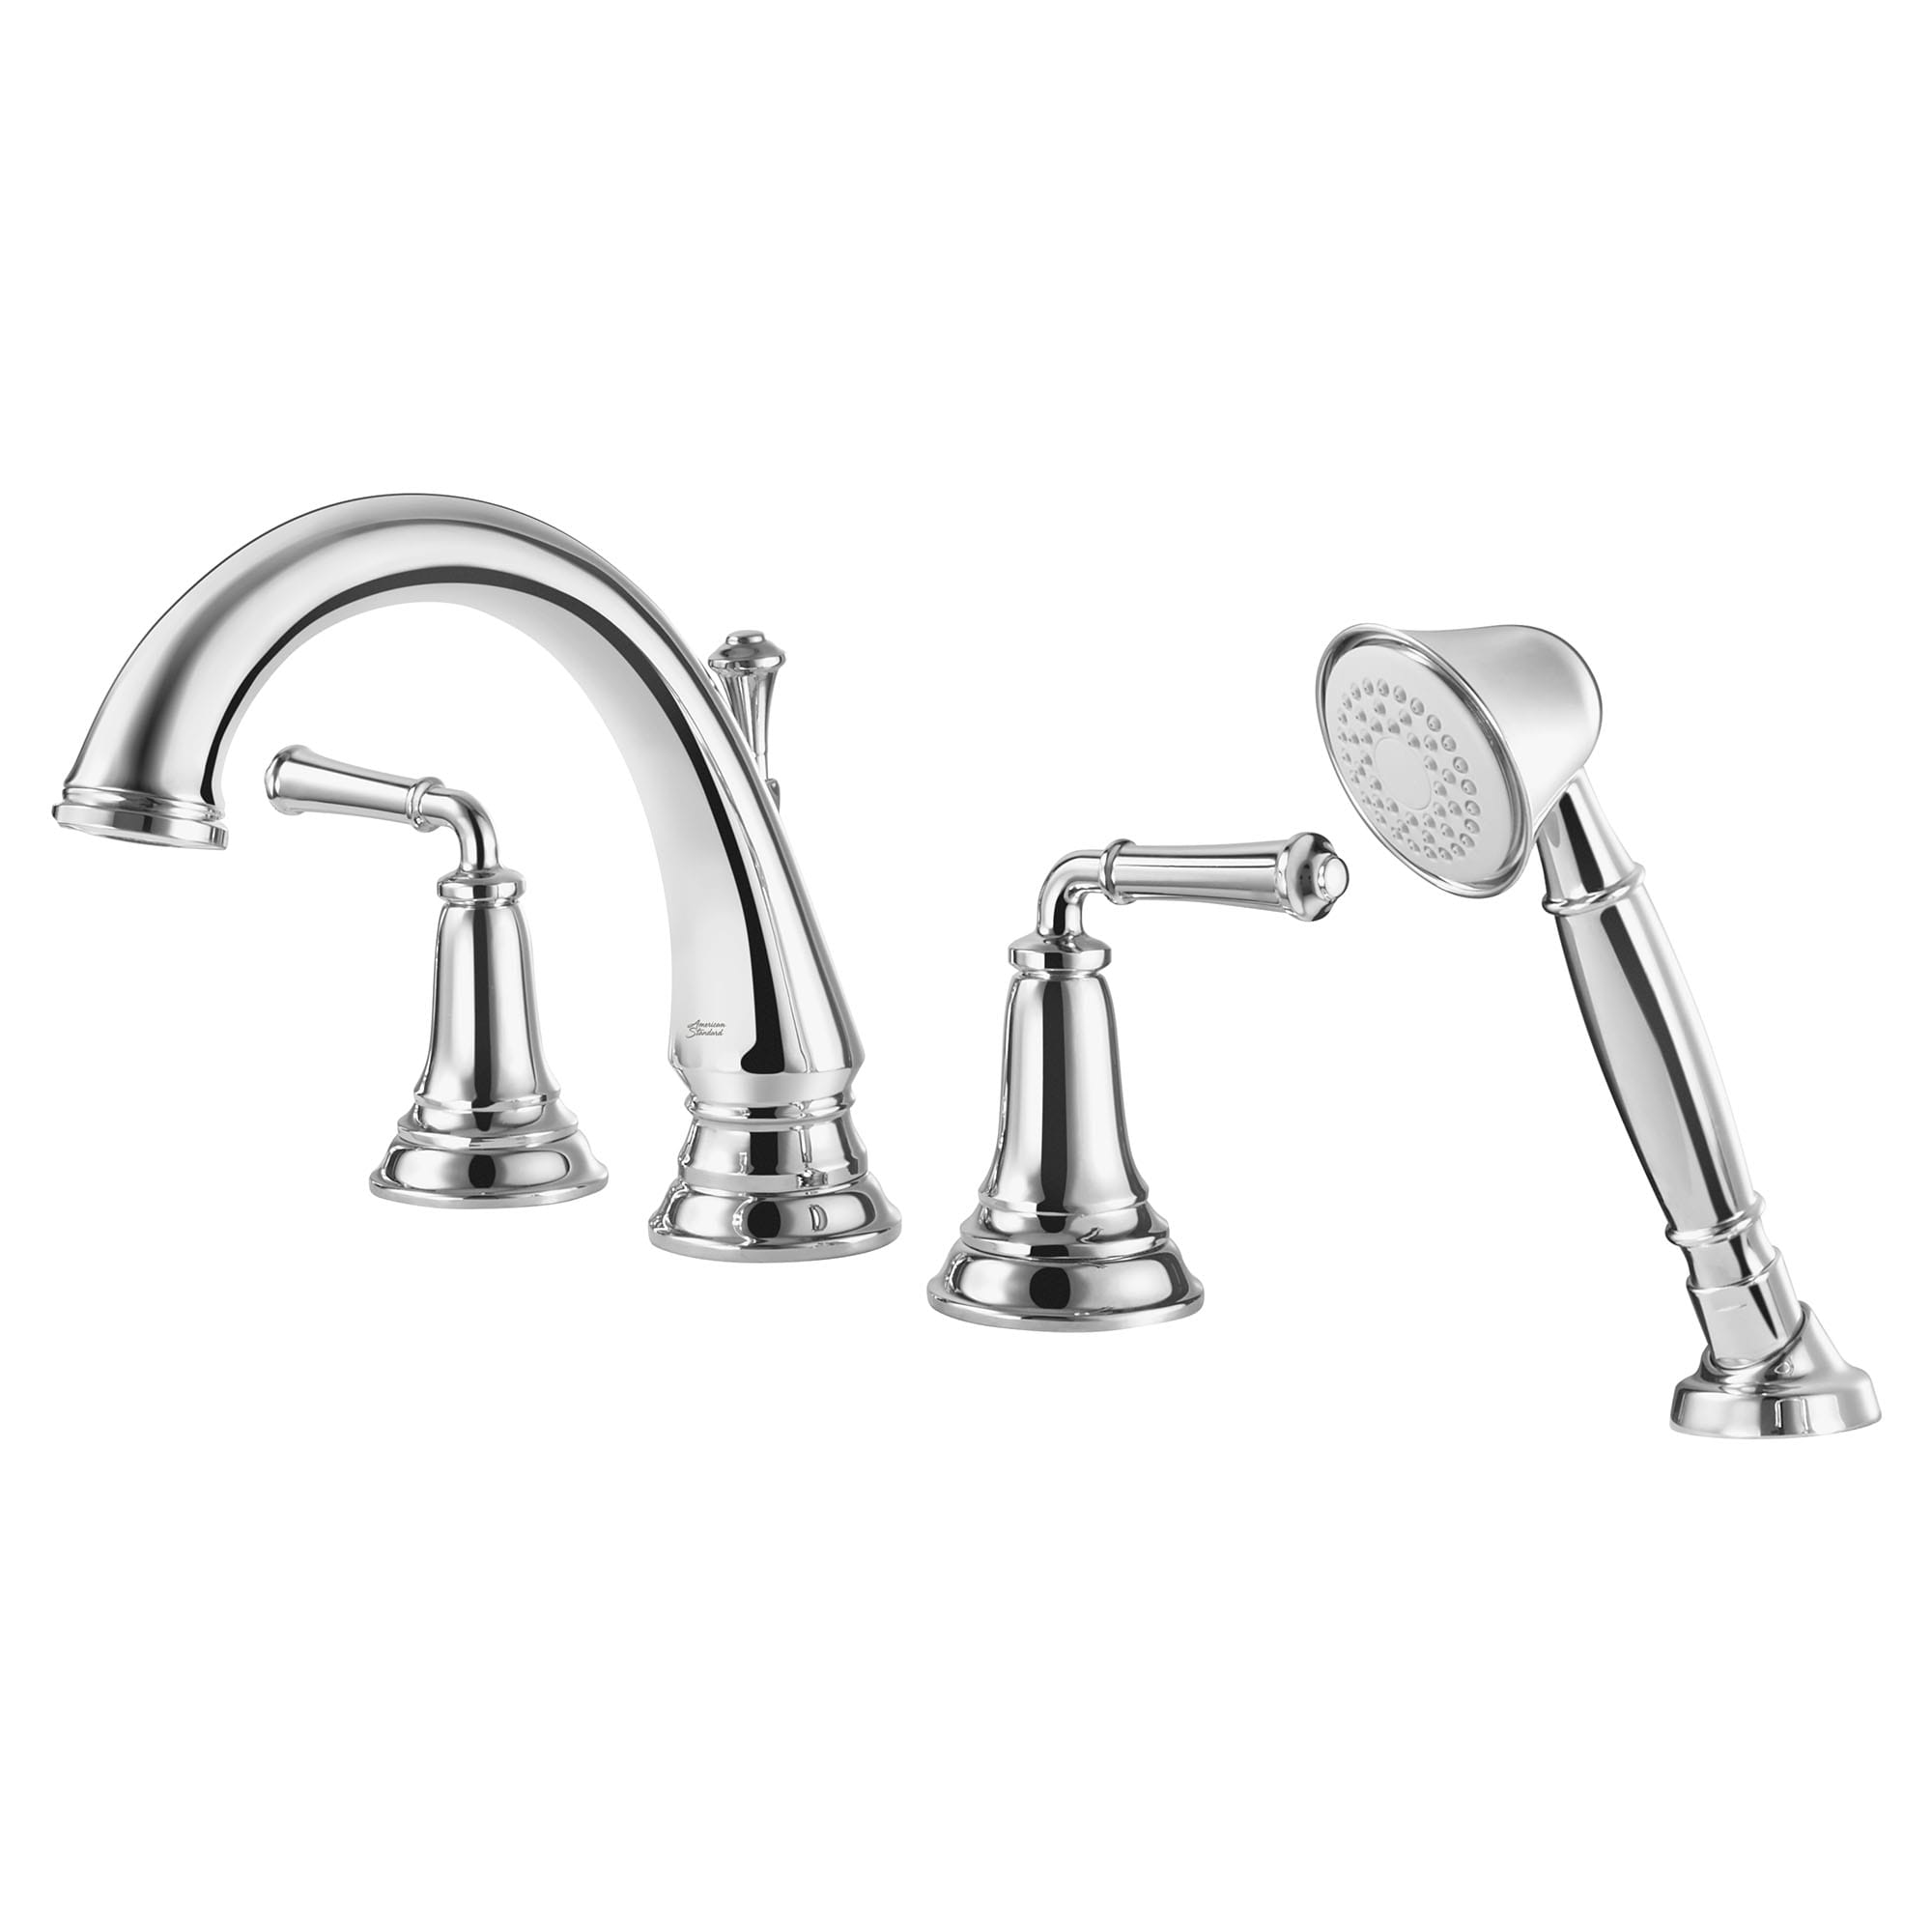 Delancey Bathtub Faucet With  Lever Handles and Personal Shower for Flash Rough In Valve CHROME